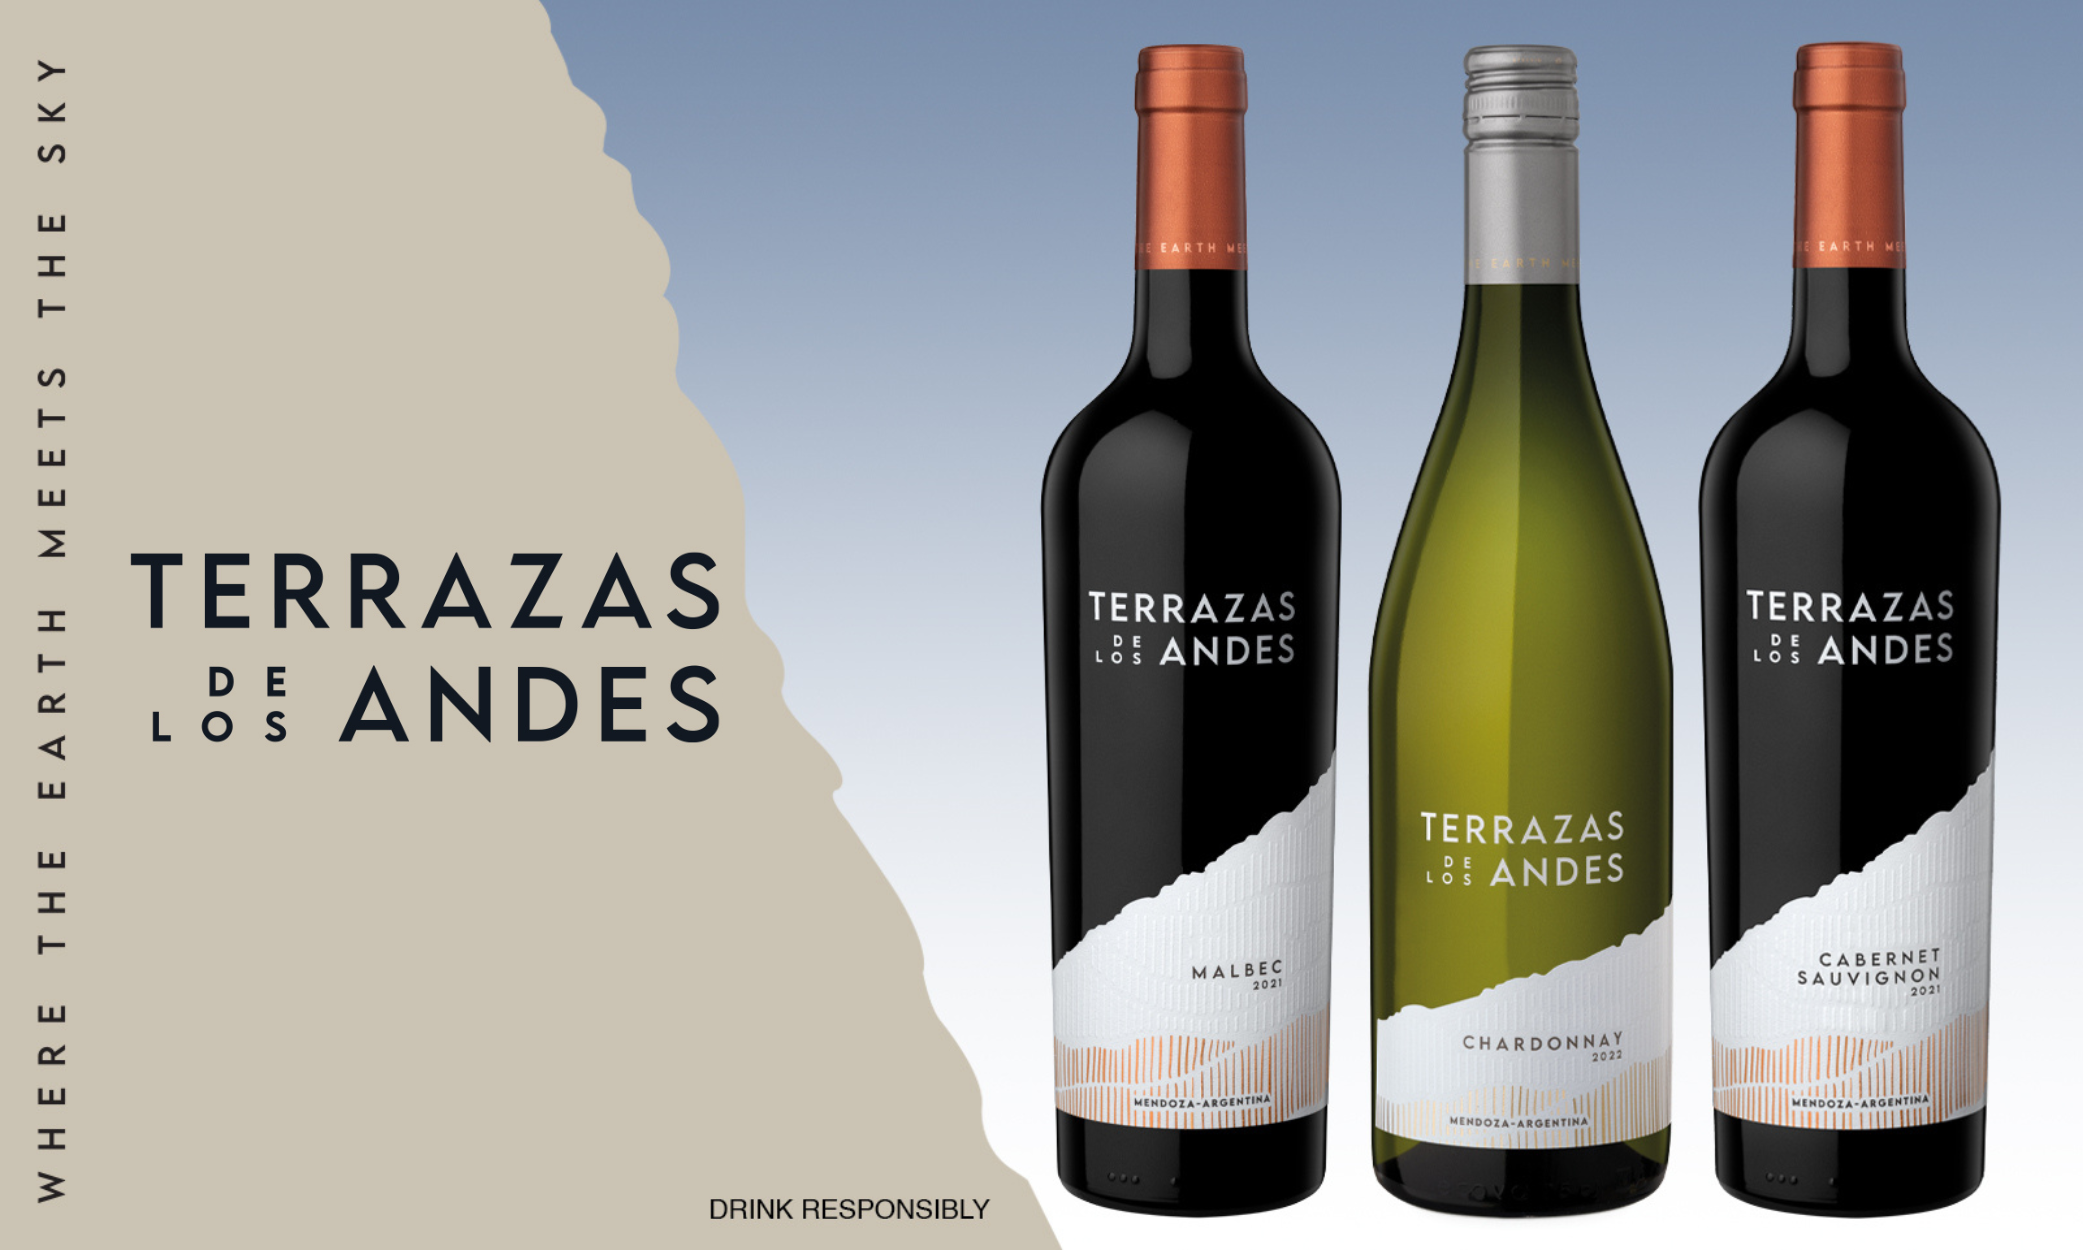 Terrazas de los Andes: New World Wine Production at Great Heights